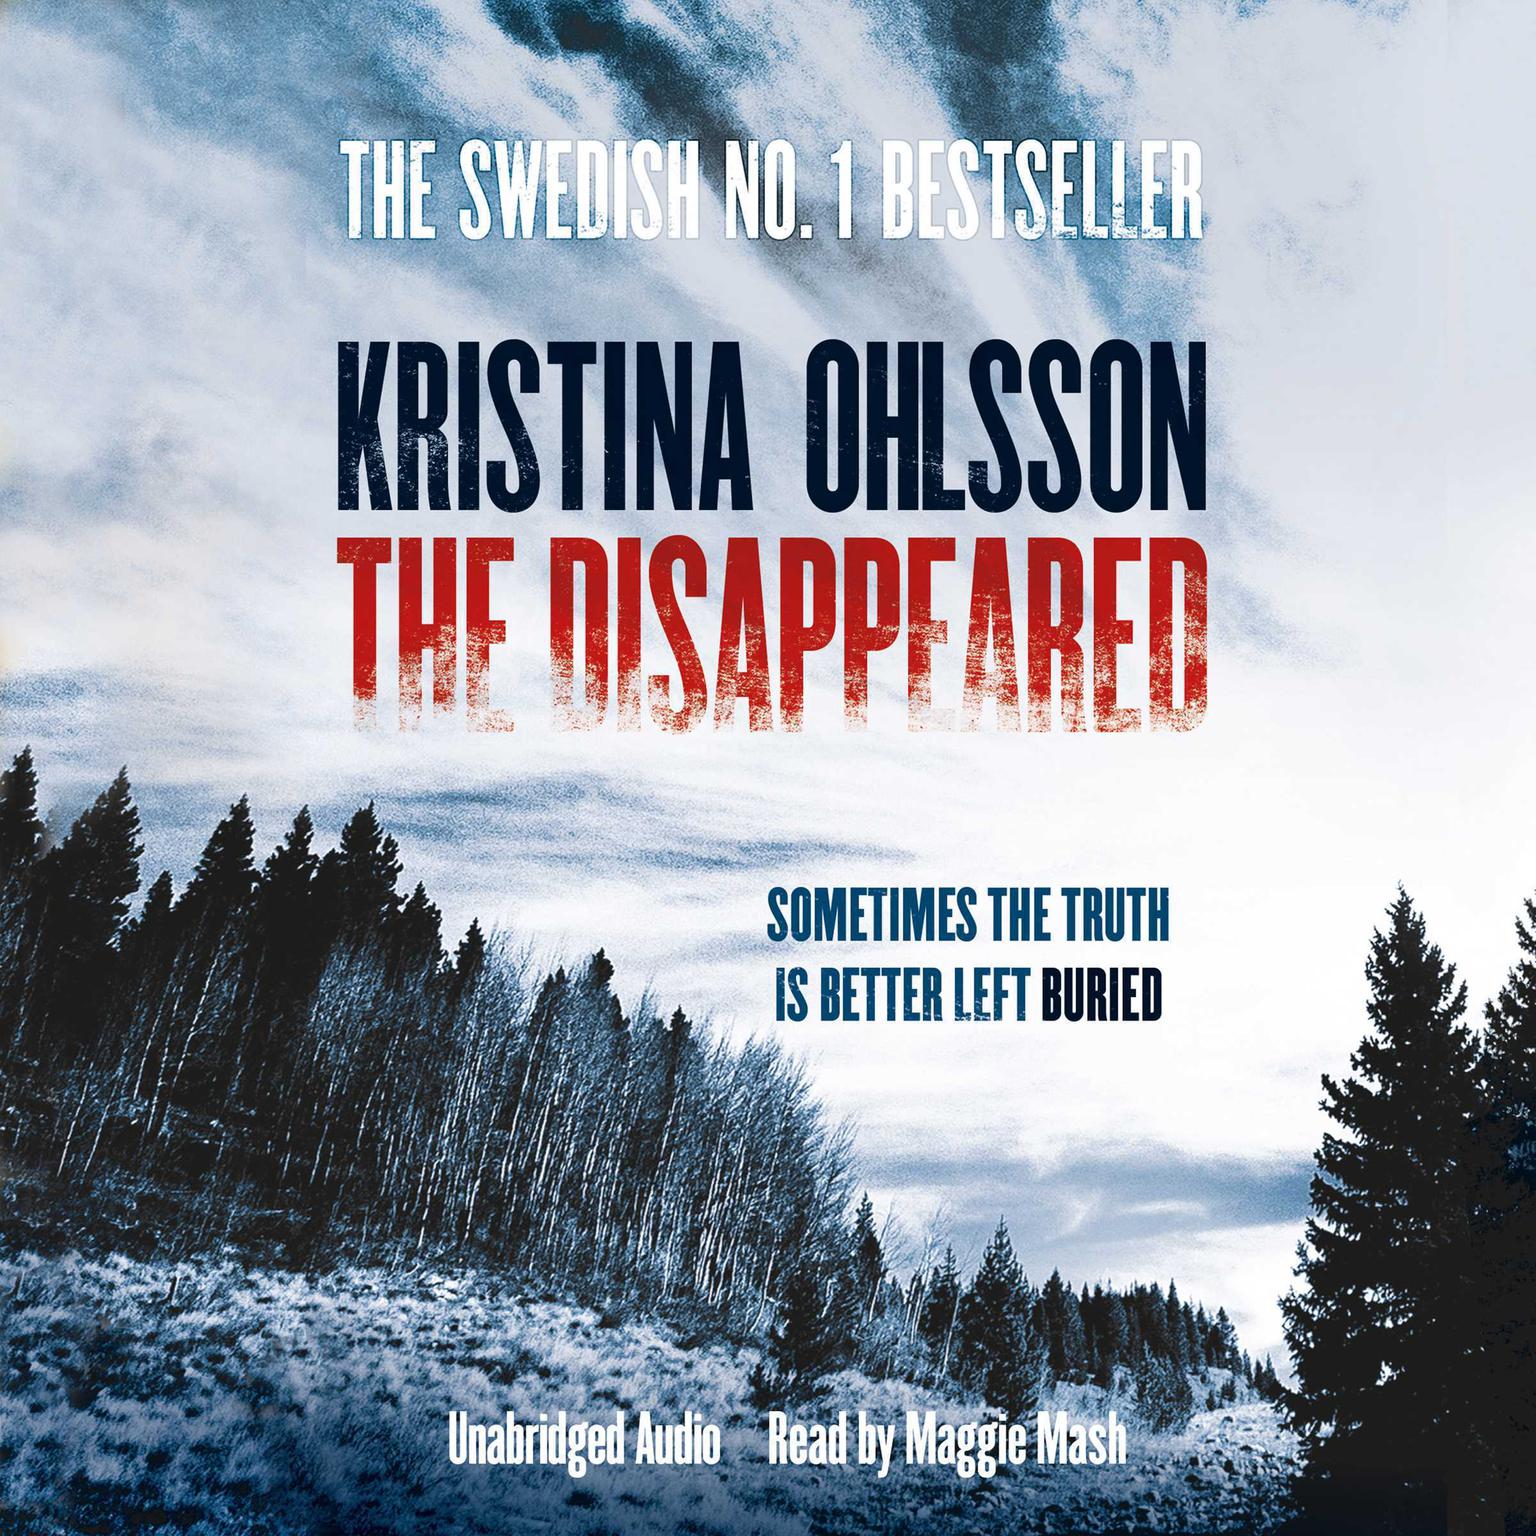 The Disappeared: A Novel Audiobook, by Kristina Ohlsson